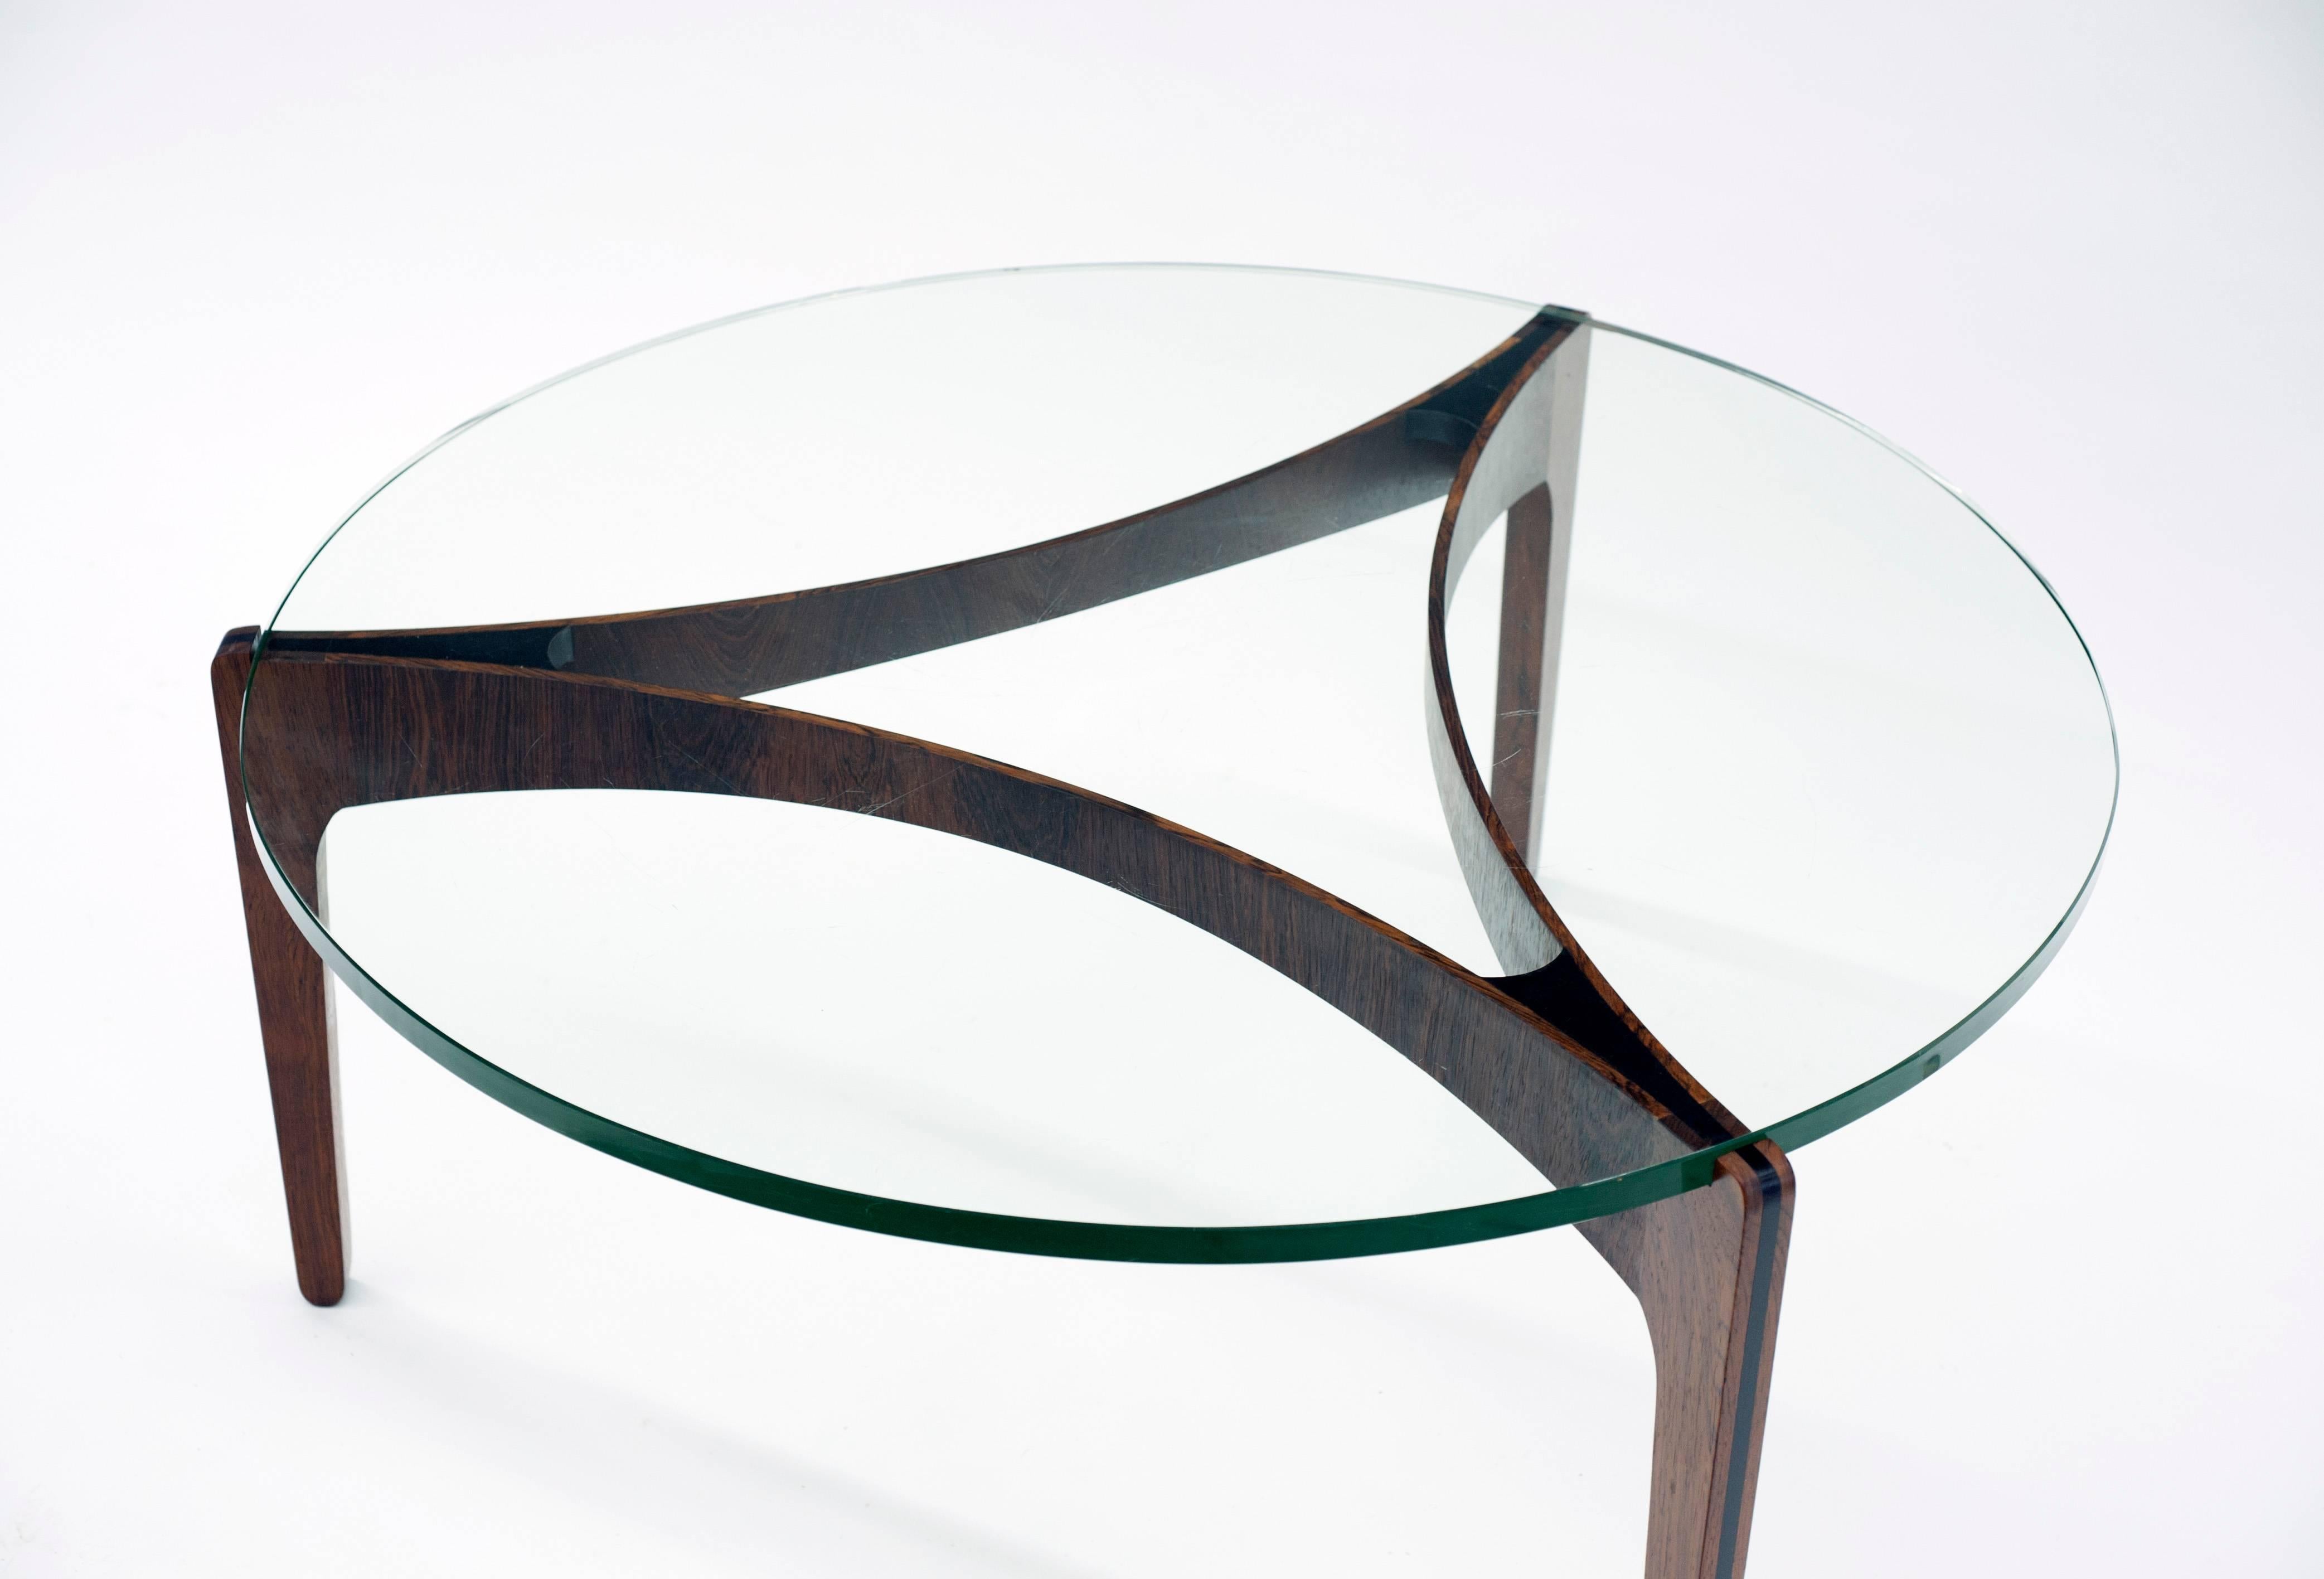 Rosewood and Ebony coffee table with original glass designed by Sven Ellekaer and manufactured by Christian Linneberg, Denmark. Rosewood coffee base with ebony details is in excellent condition. Glass has expected wear in the form of some light